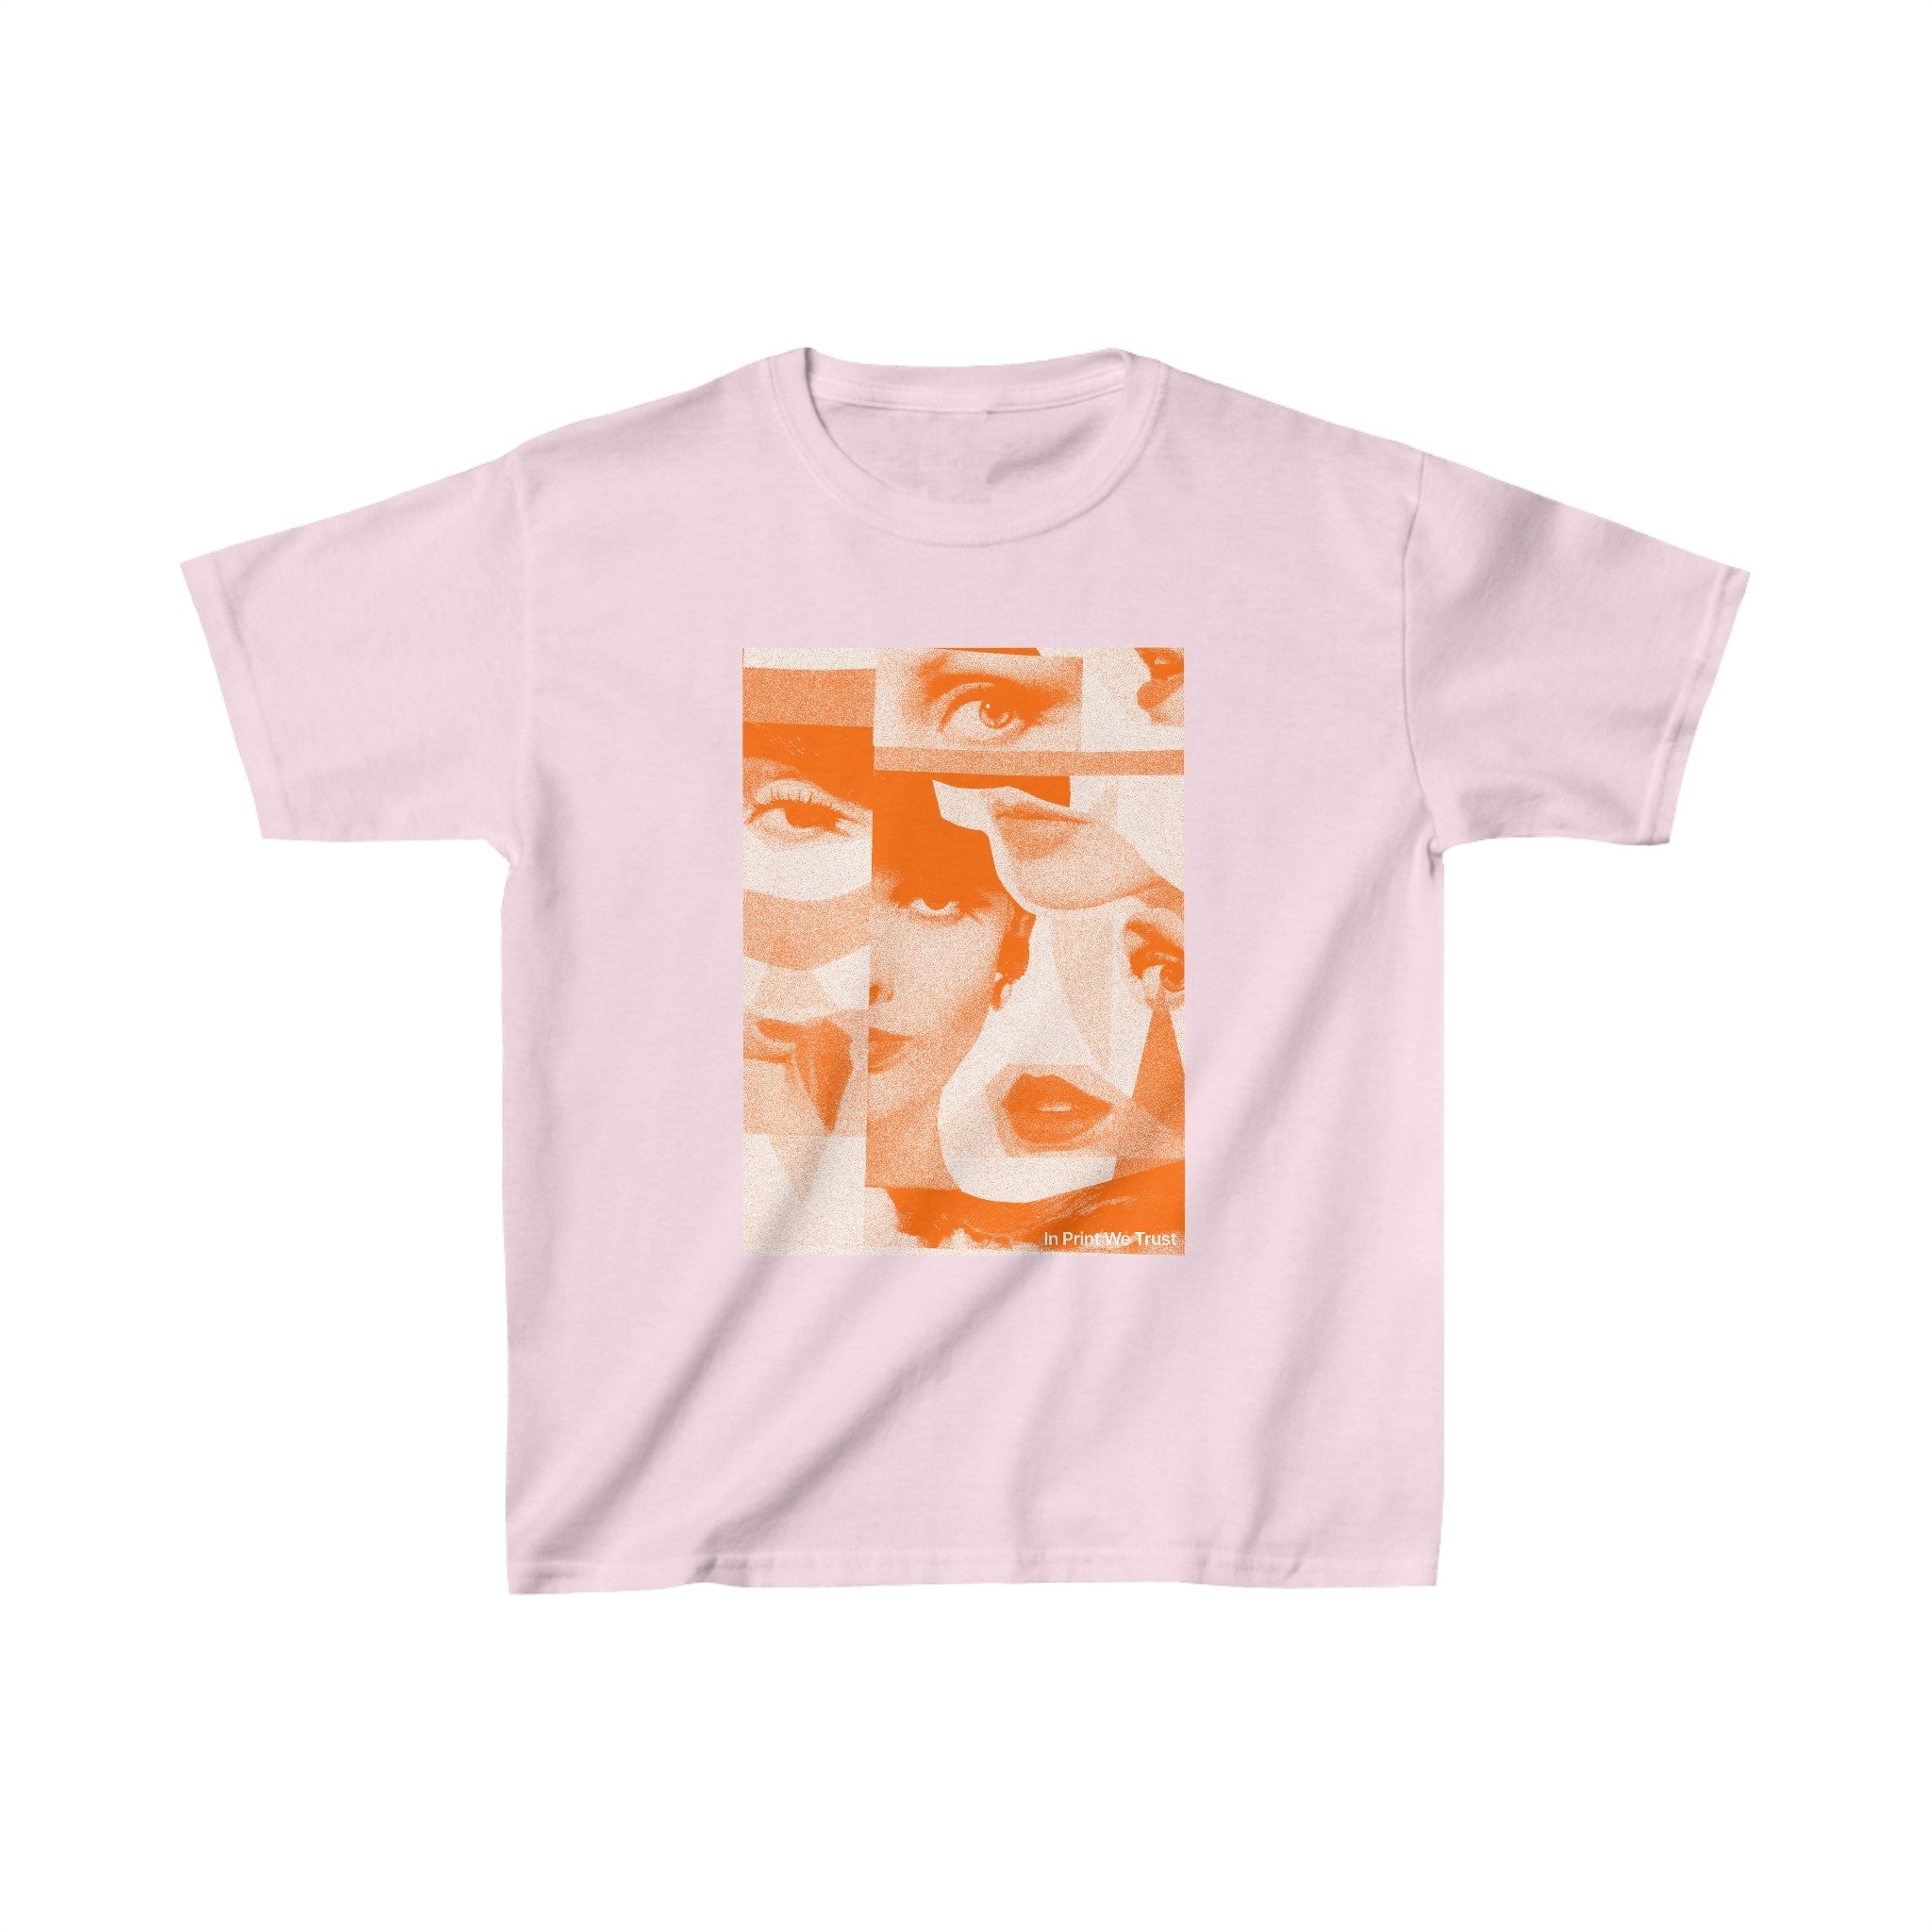 'Many Faces' baby tee - In Print We Trust